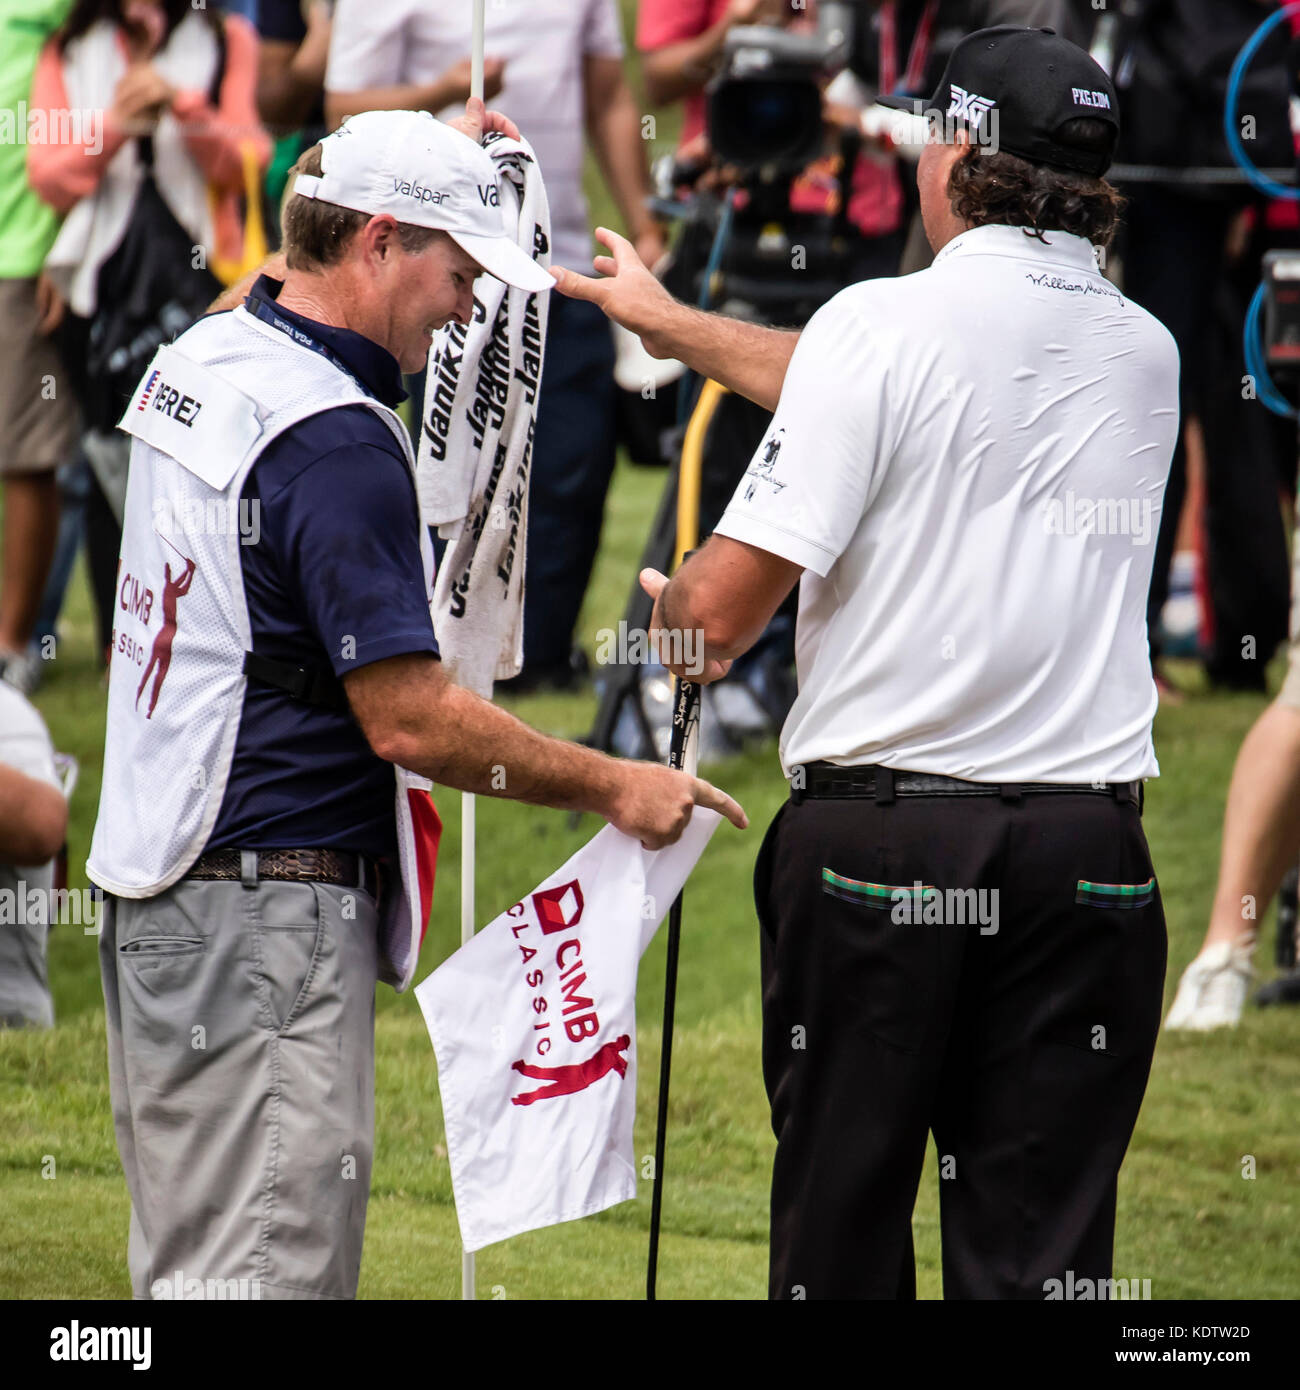 Kuala Lumpur, Malaysia. 15th October, 2017. Pat Perez caddy have taken off the 18th hole flag from the flag pole as a momento at the PGA CIMB Classic 2017 in Kuala Lumpur, Malaysia. © Danny Chan/Alamy Live News. Stock Photo